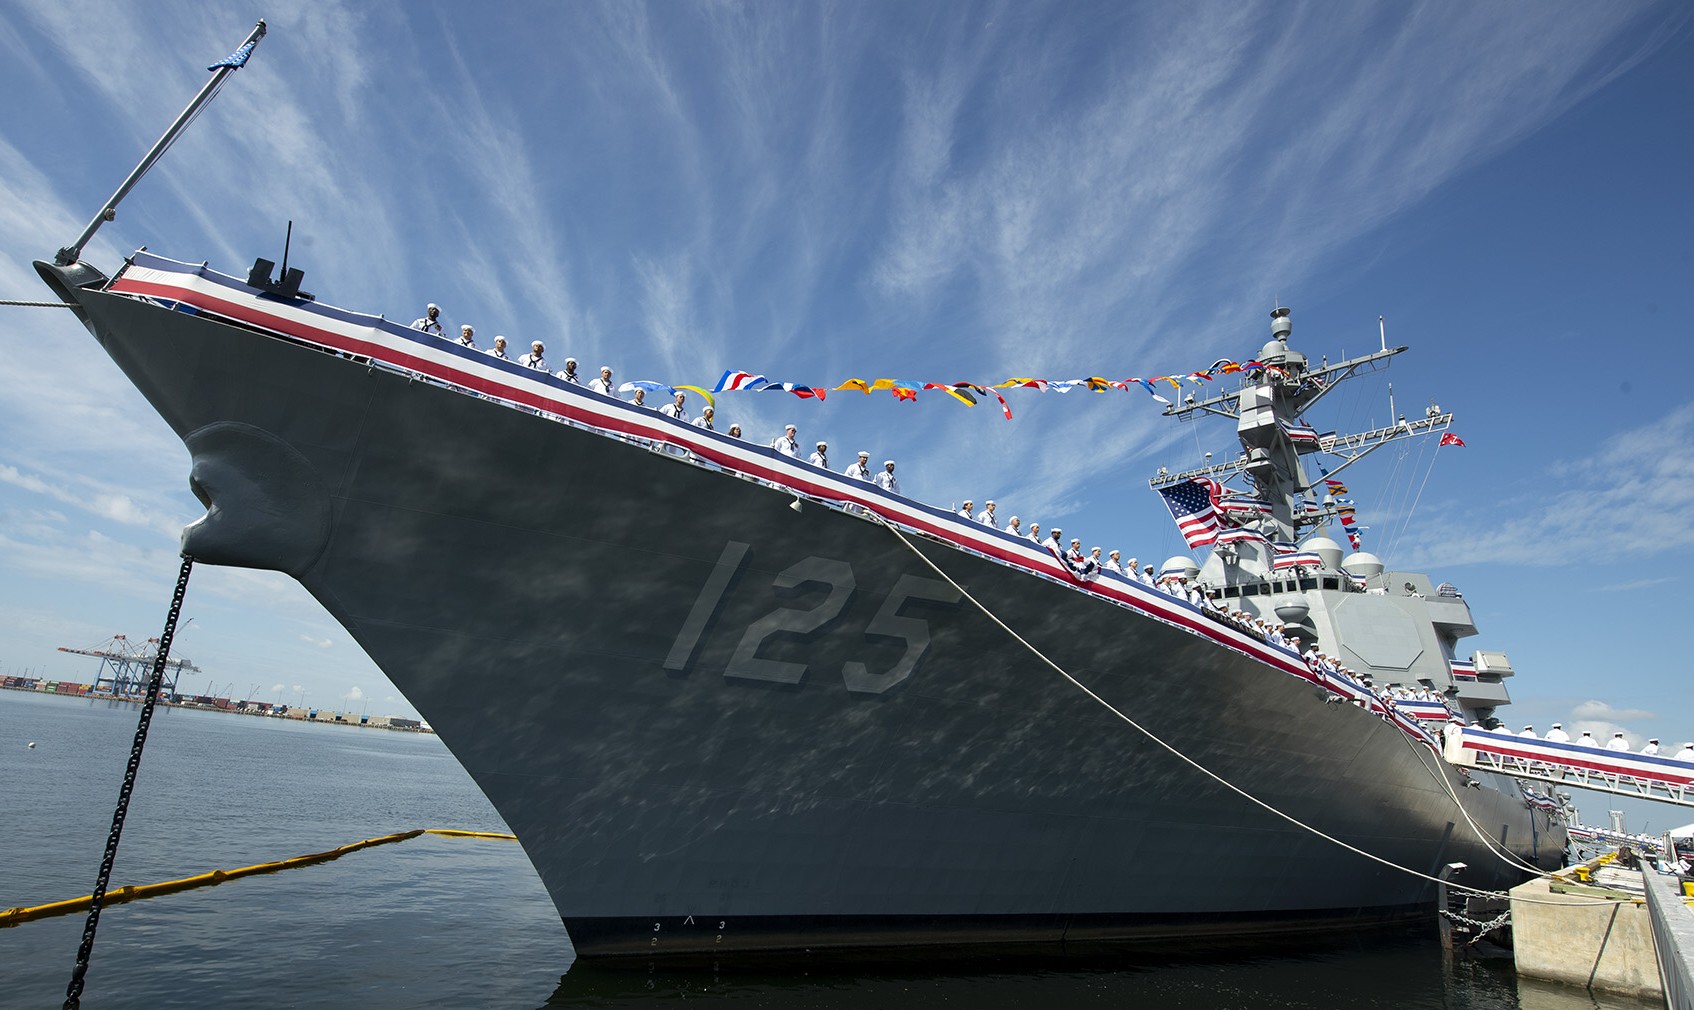 ddg-125 uss jack h. lucas arleigh burke class guided missile destroyer aegis us navy commissioning ceremony tampa florida 14